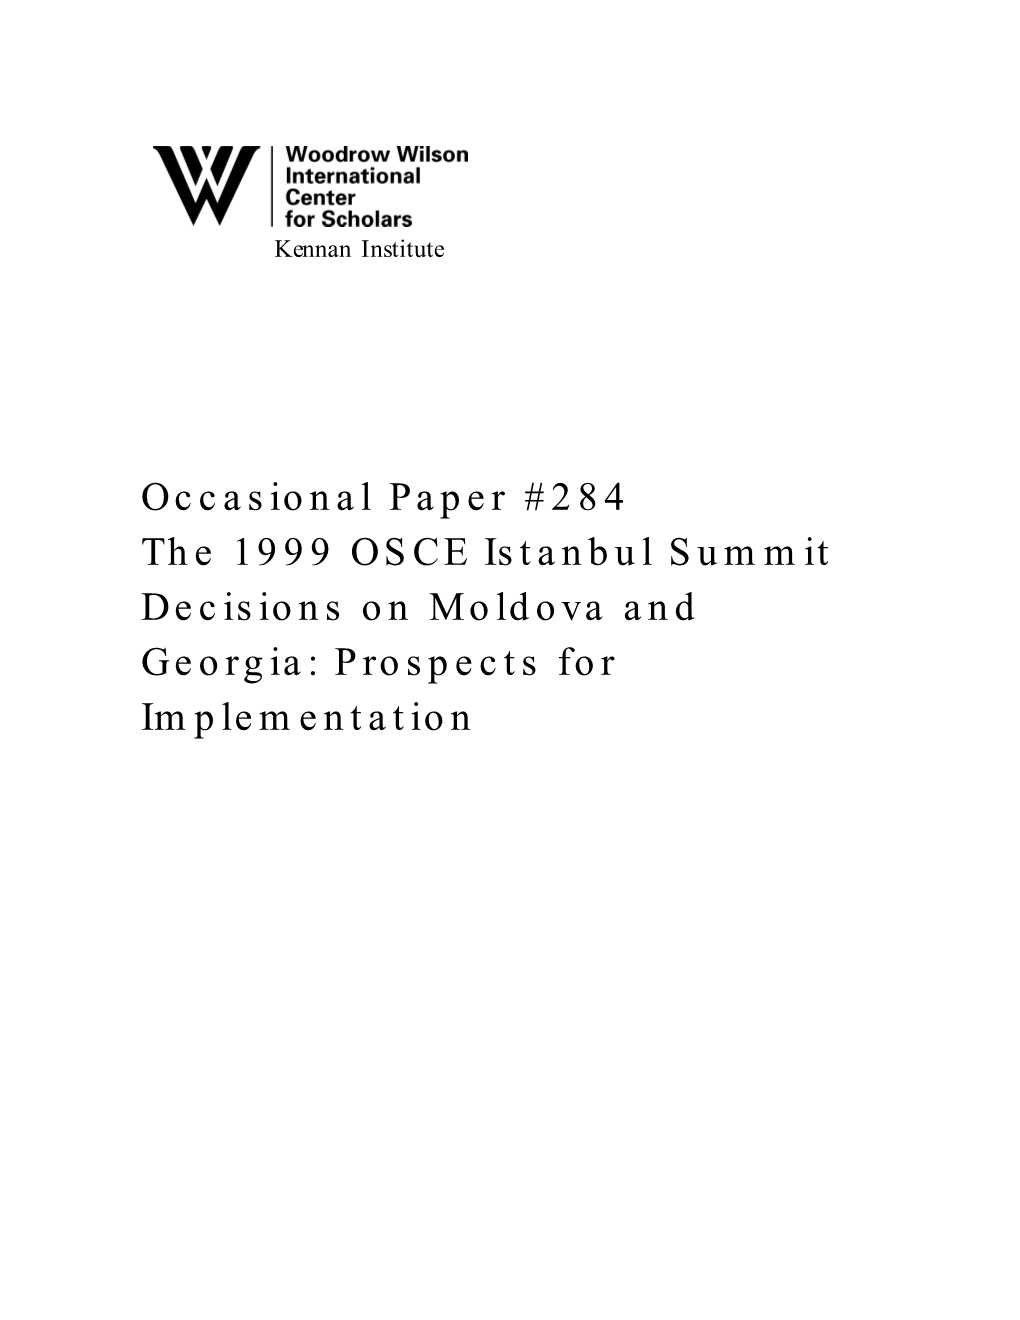 The 1999 OSCE Istanbul Summit Decisions on Moldova and Georgia: Prospects for Implementation